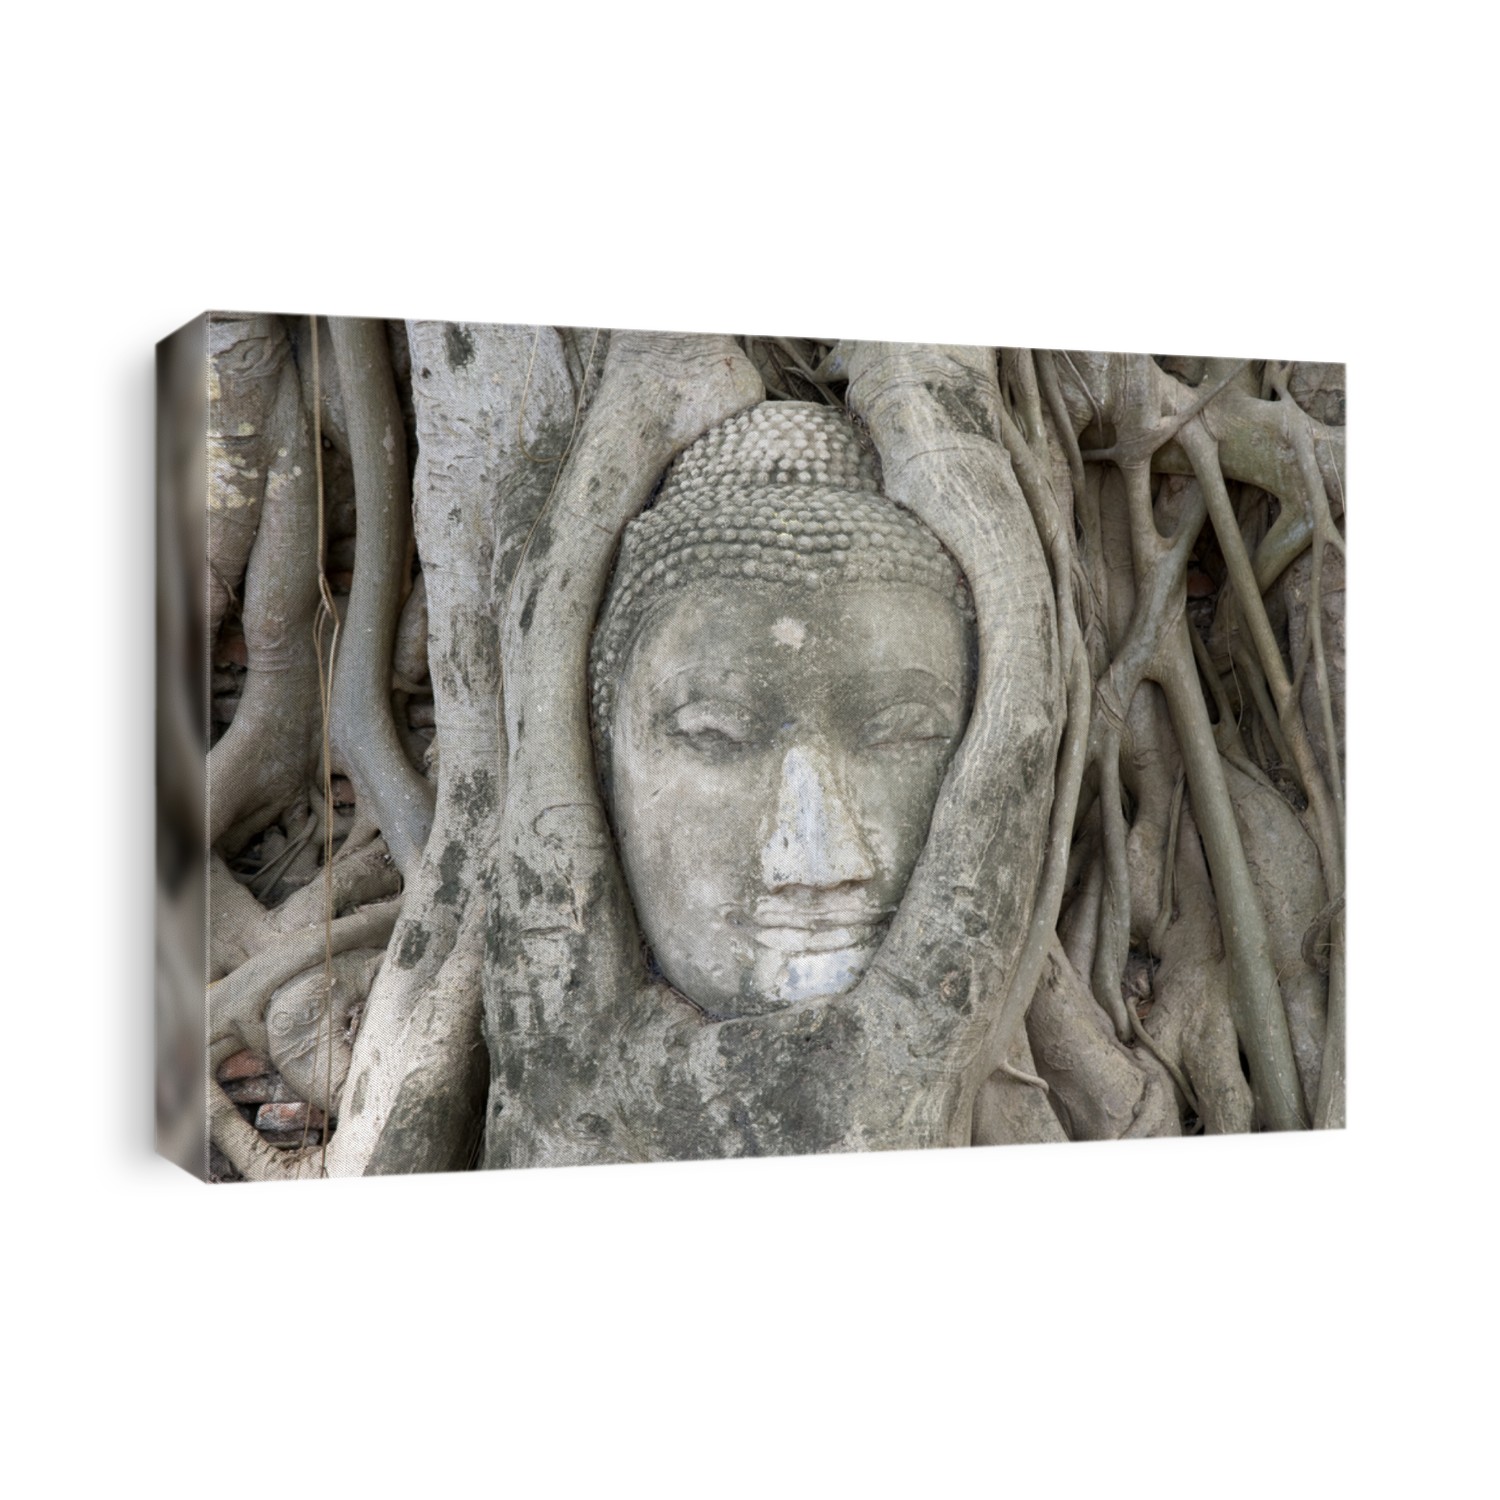 Thailand: Buddha head strangled by the roots of a banyan tree in Ayuthaya